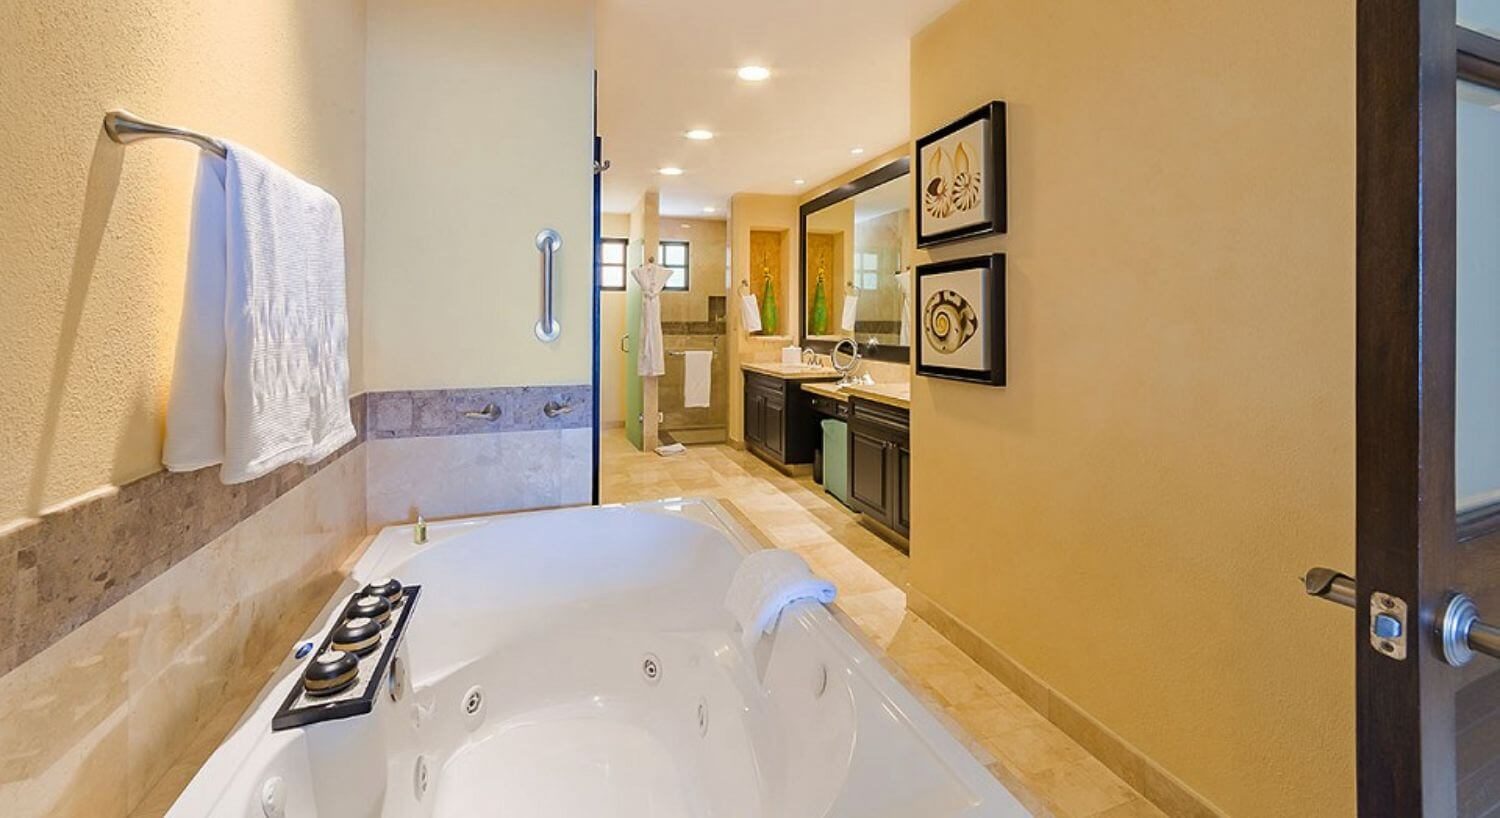 A large bathroom with a jetted bathtub, two granite bathroom sinks with a vanity with green ottoman in the middle, and a shower in the back.